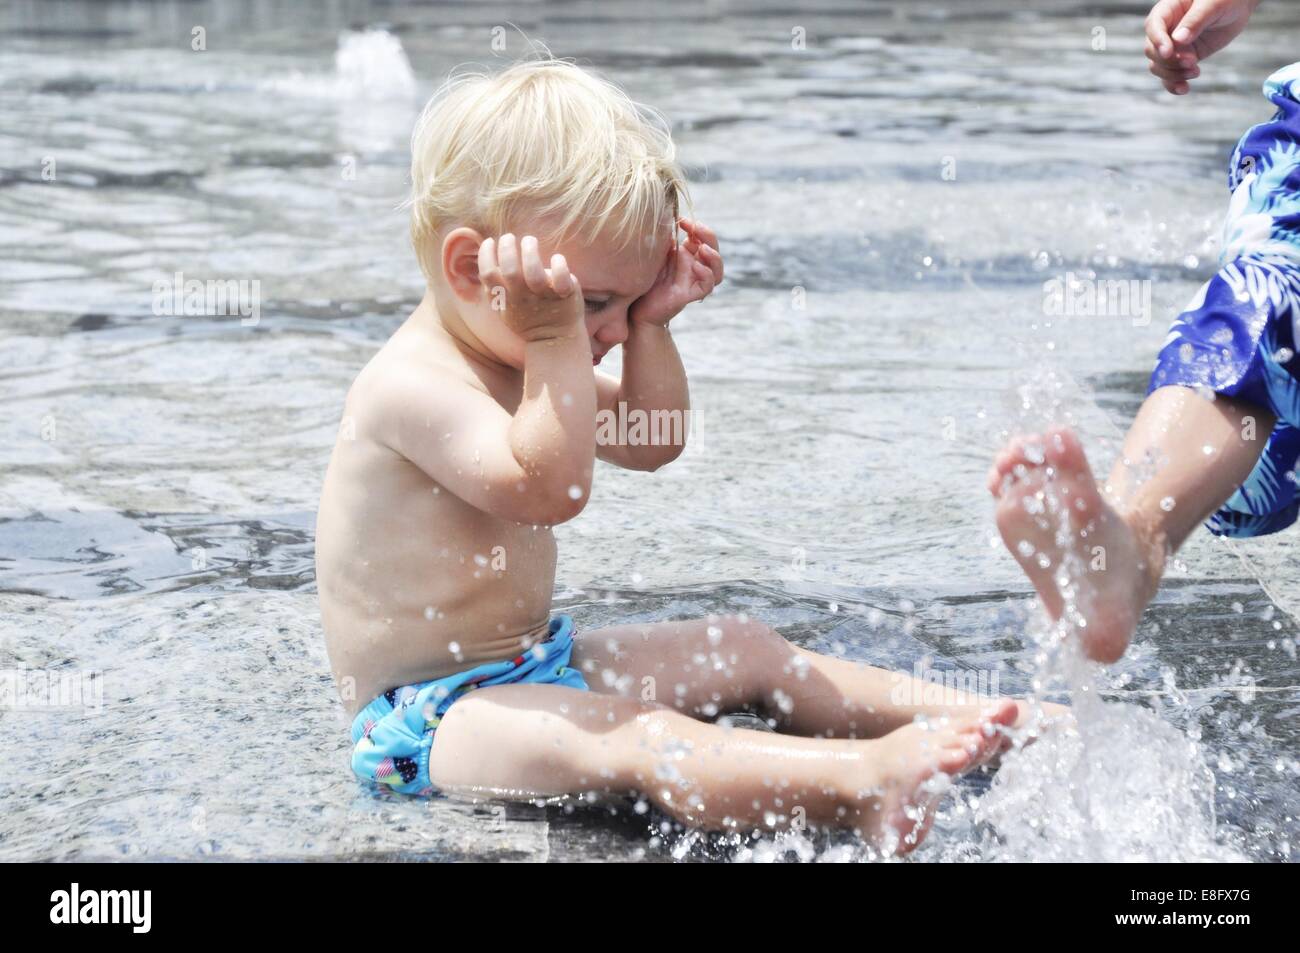 Boys playing in water fountain Stock Photo